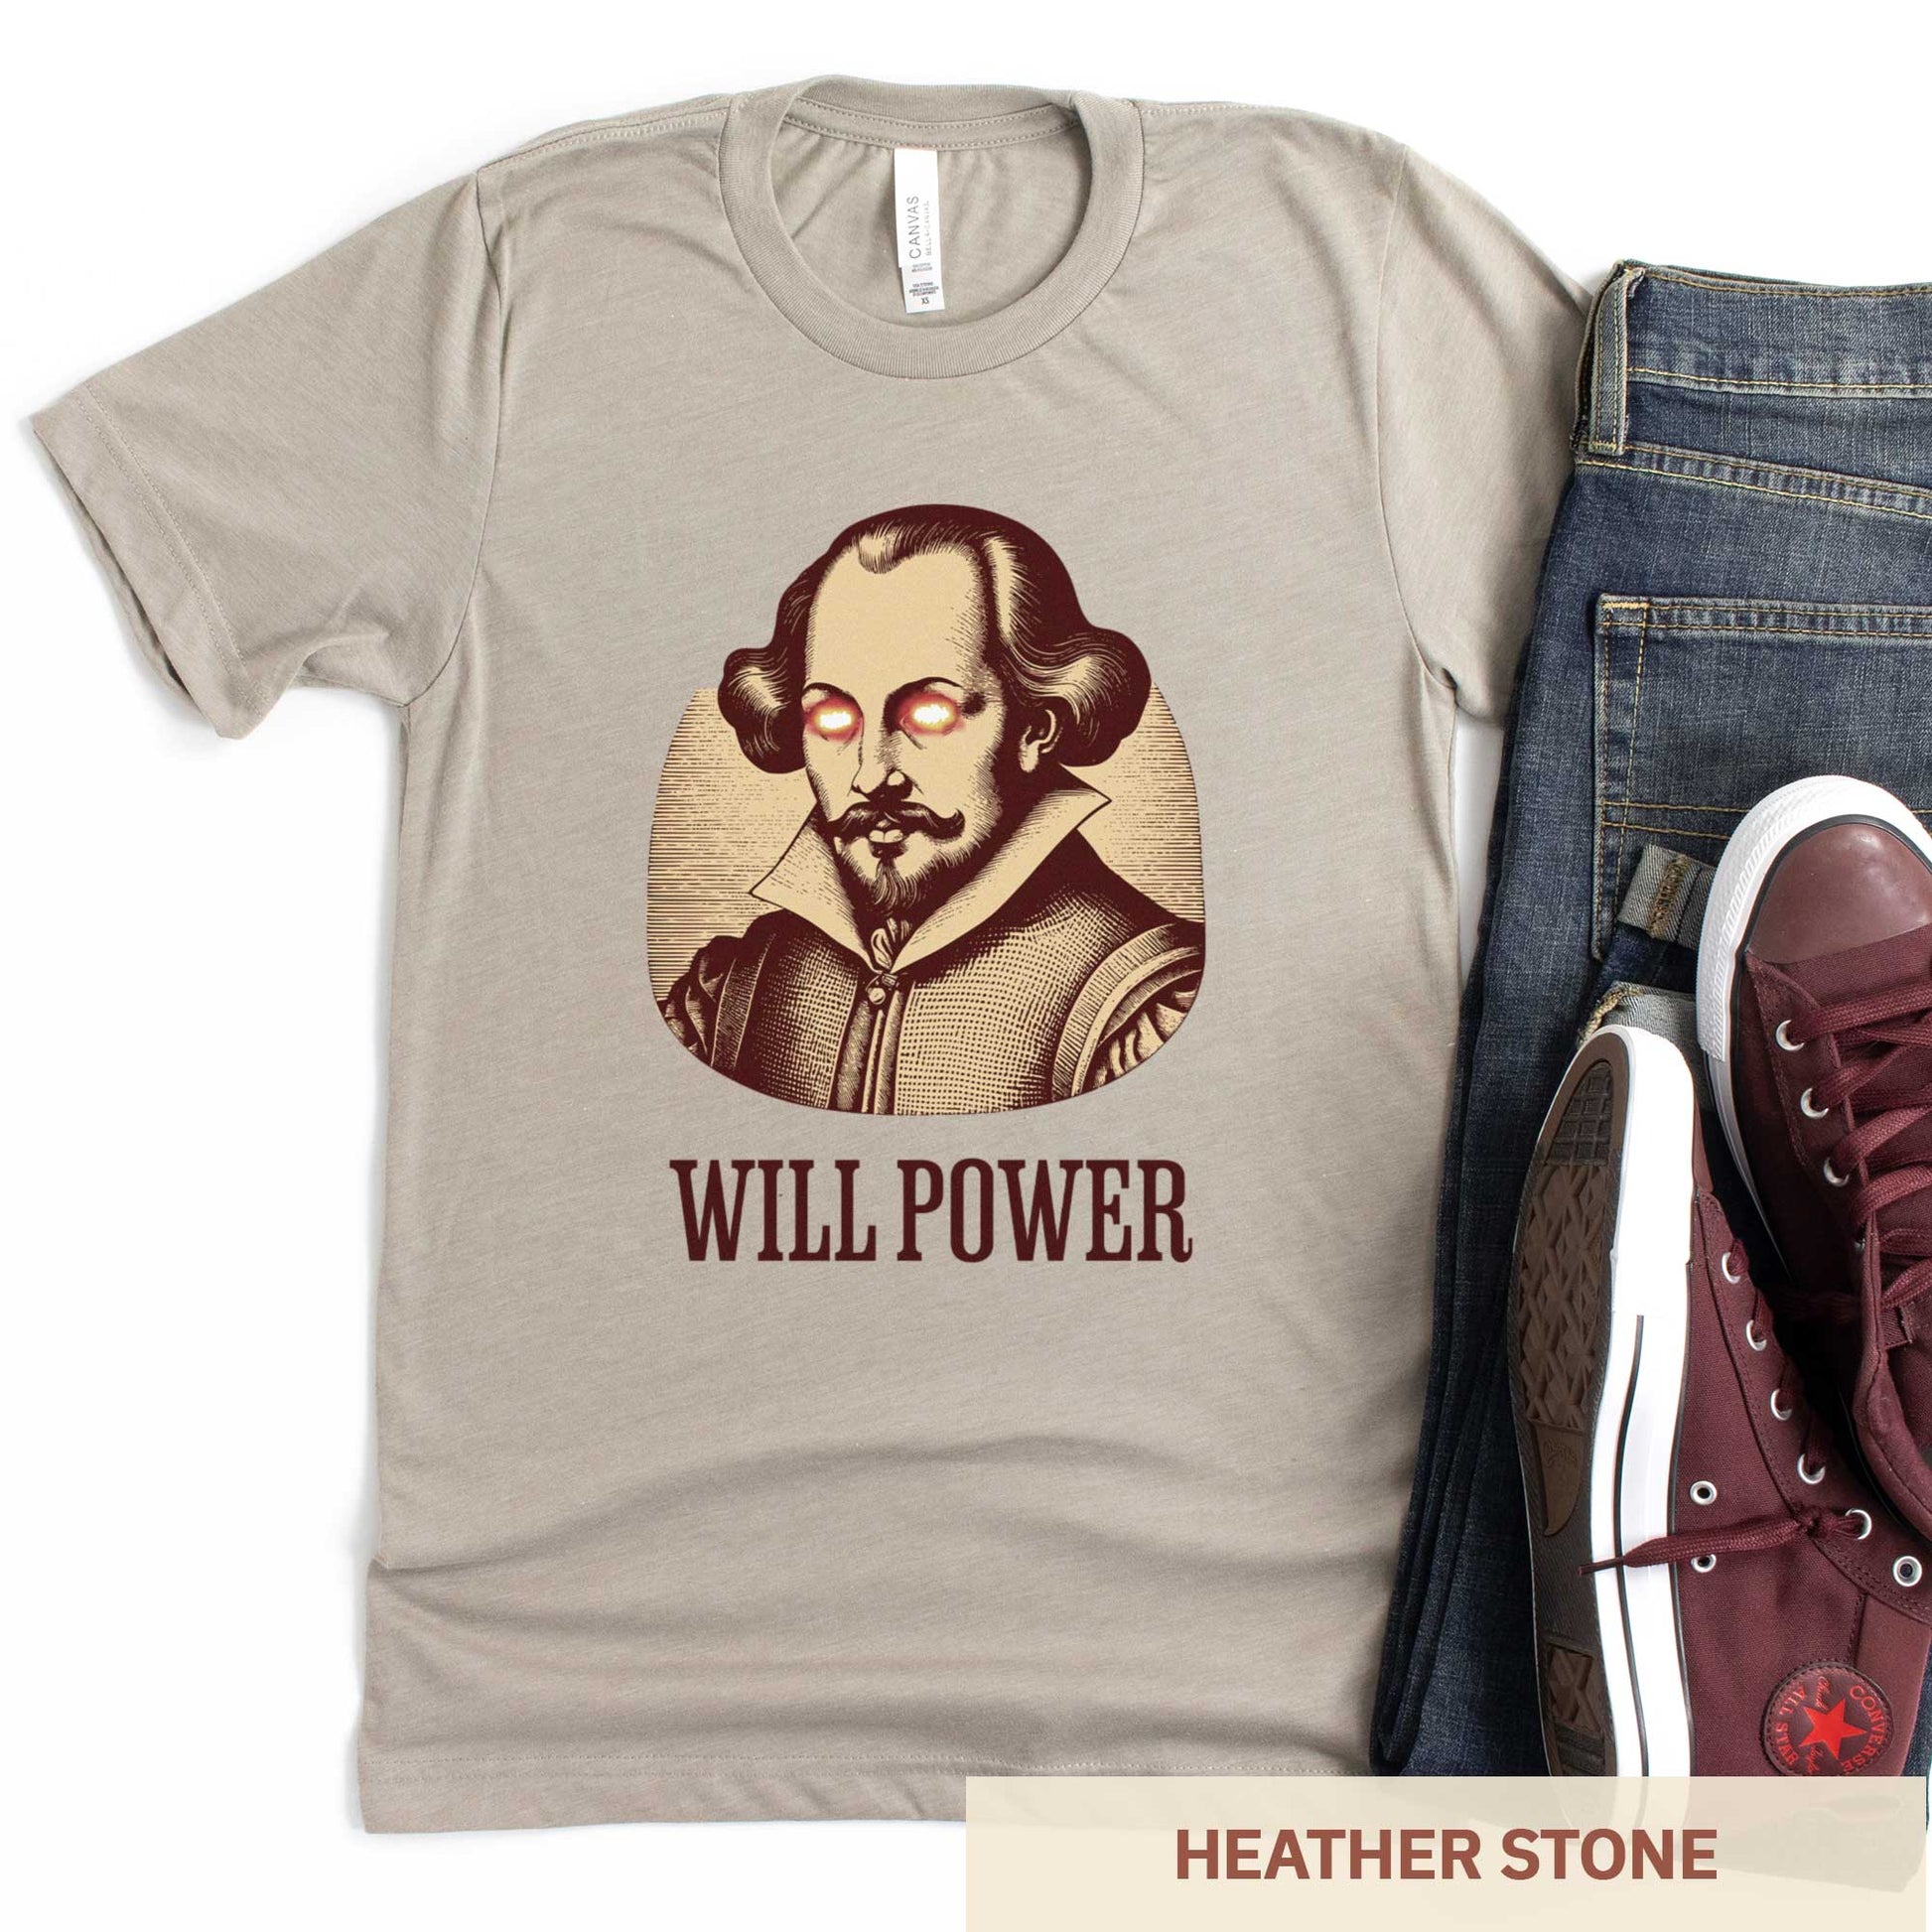 A heather stone Bella Canvas t-shirt featuring a woodcut of William Shakespeare with glowing superhero eyes and the words Will Power.